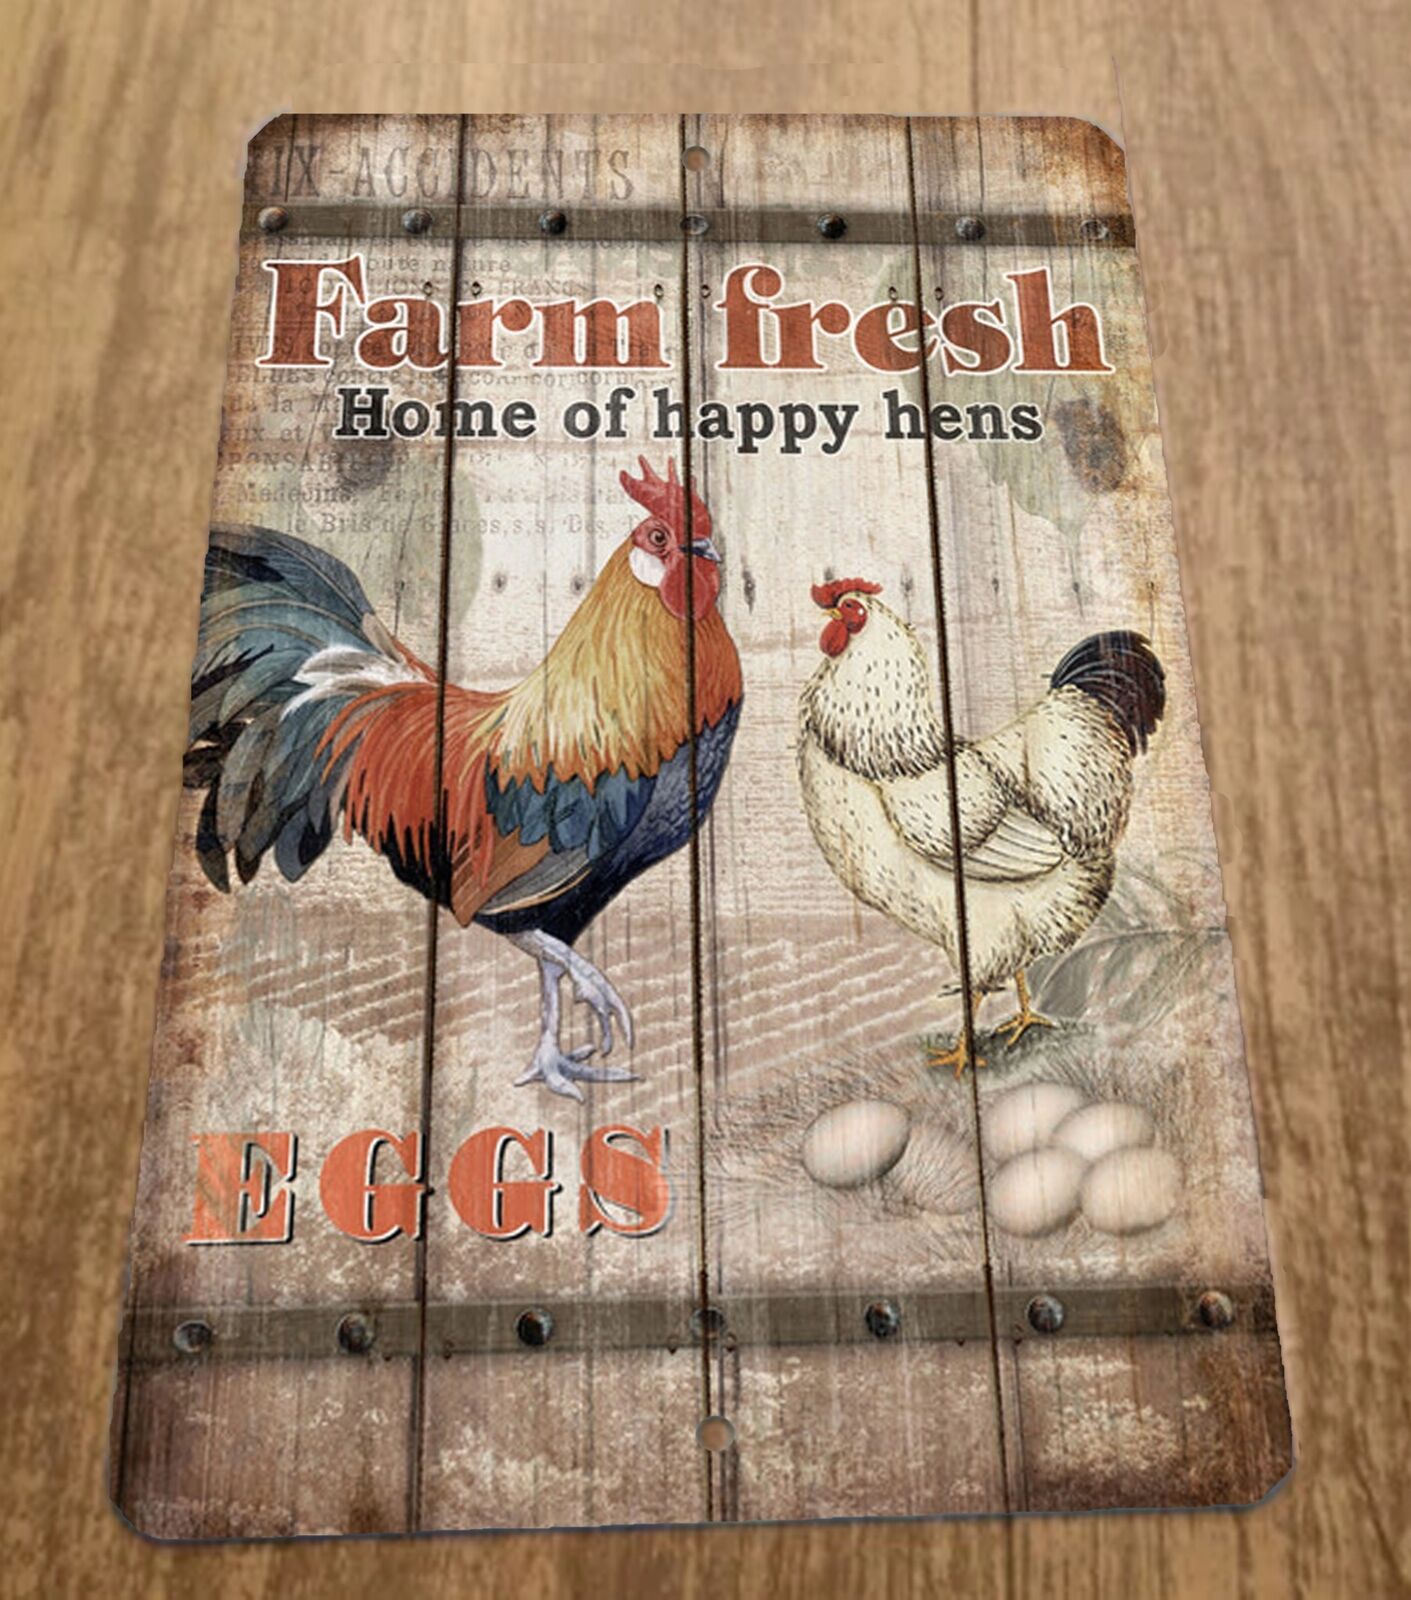 Farm Fresh Home of the Happy Hens #2 Vintage Chicken 8x12 Metal Wall Animal Sign